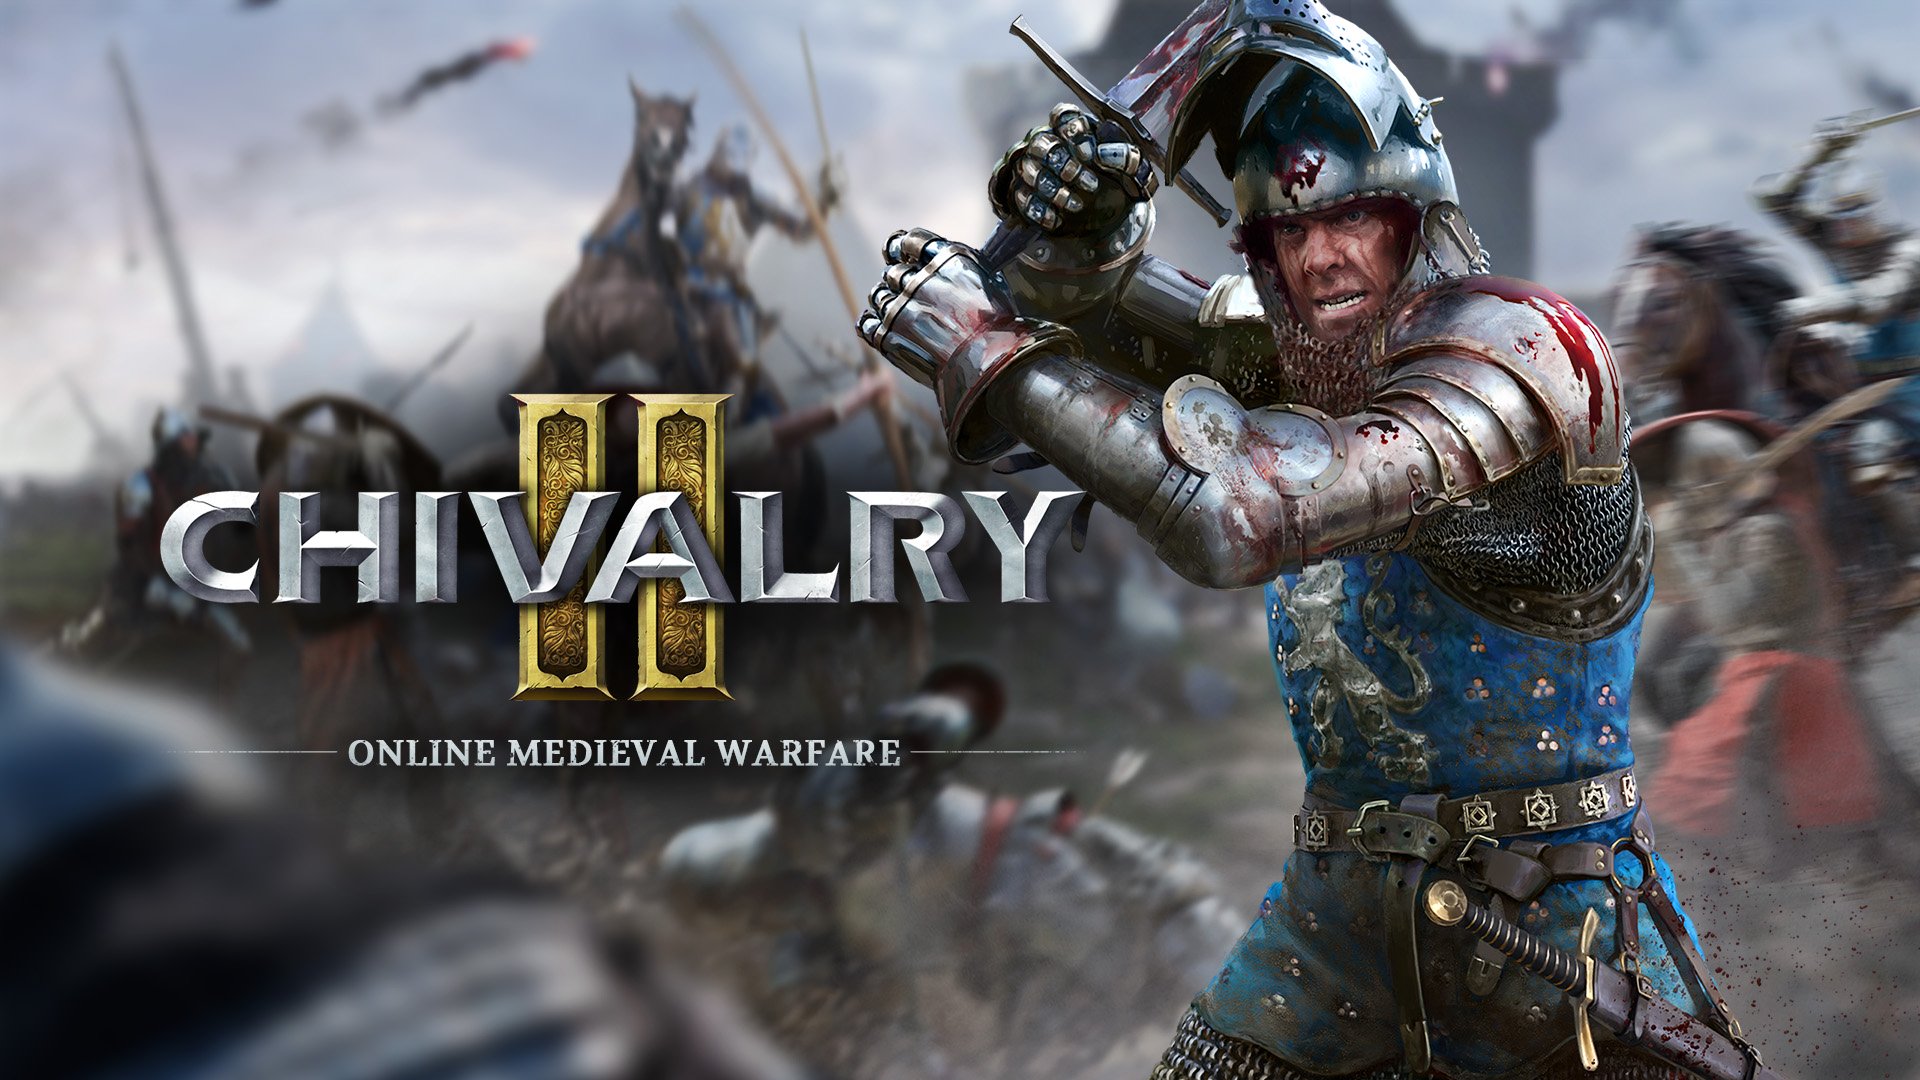 Chivalry 2: Over 1 Million Units Sold & Over 420 Million Knights Slain in Battle Since Launch